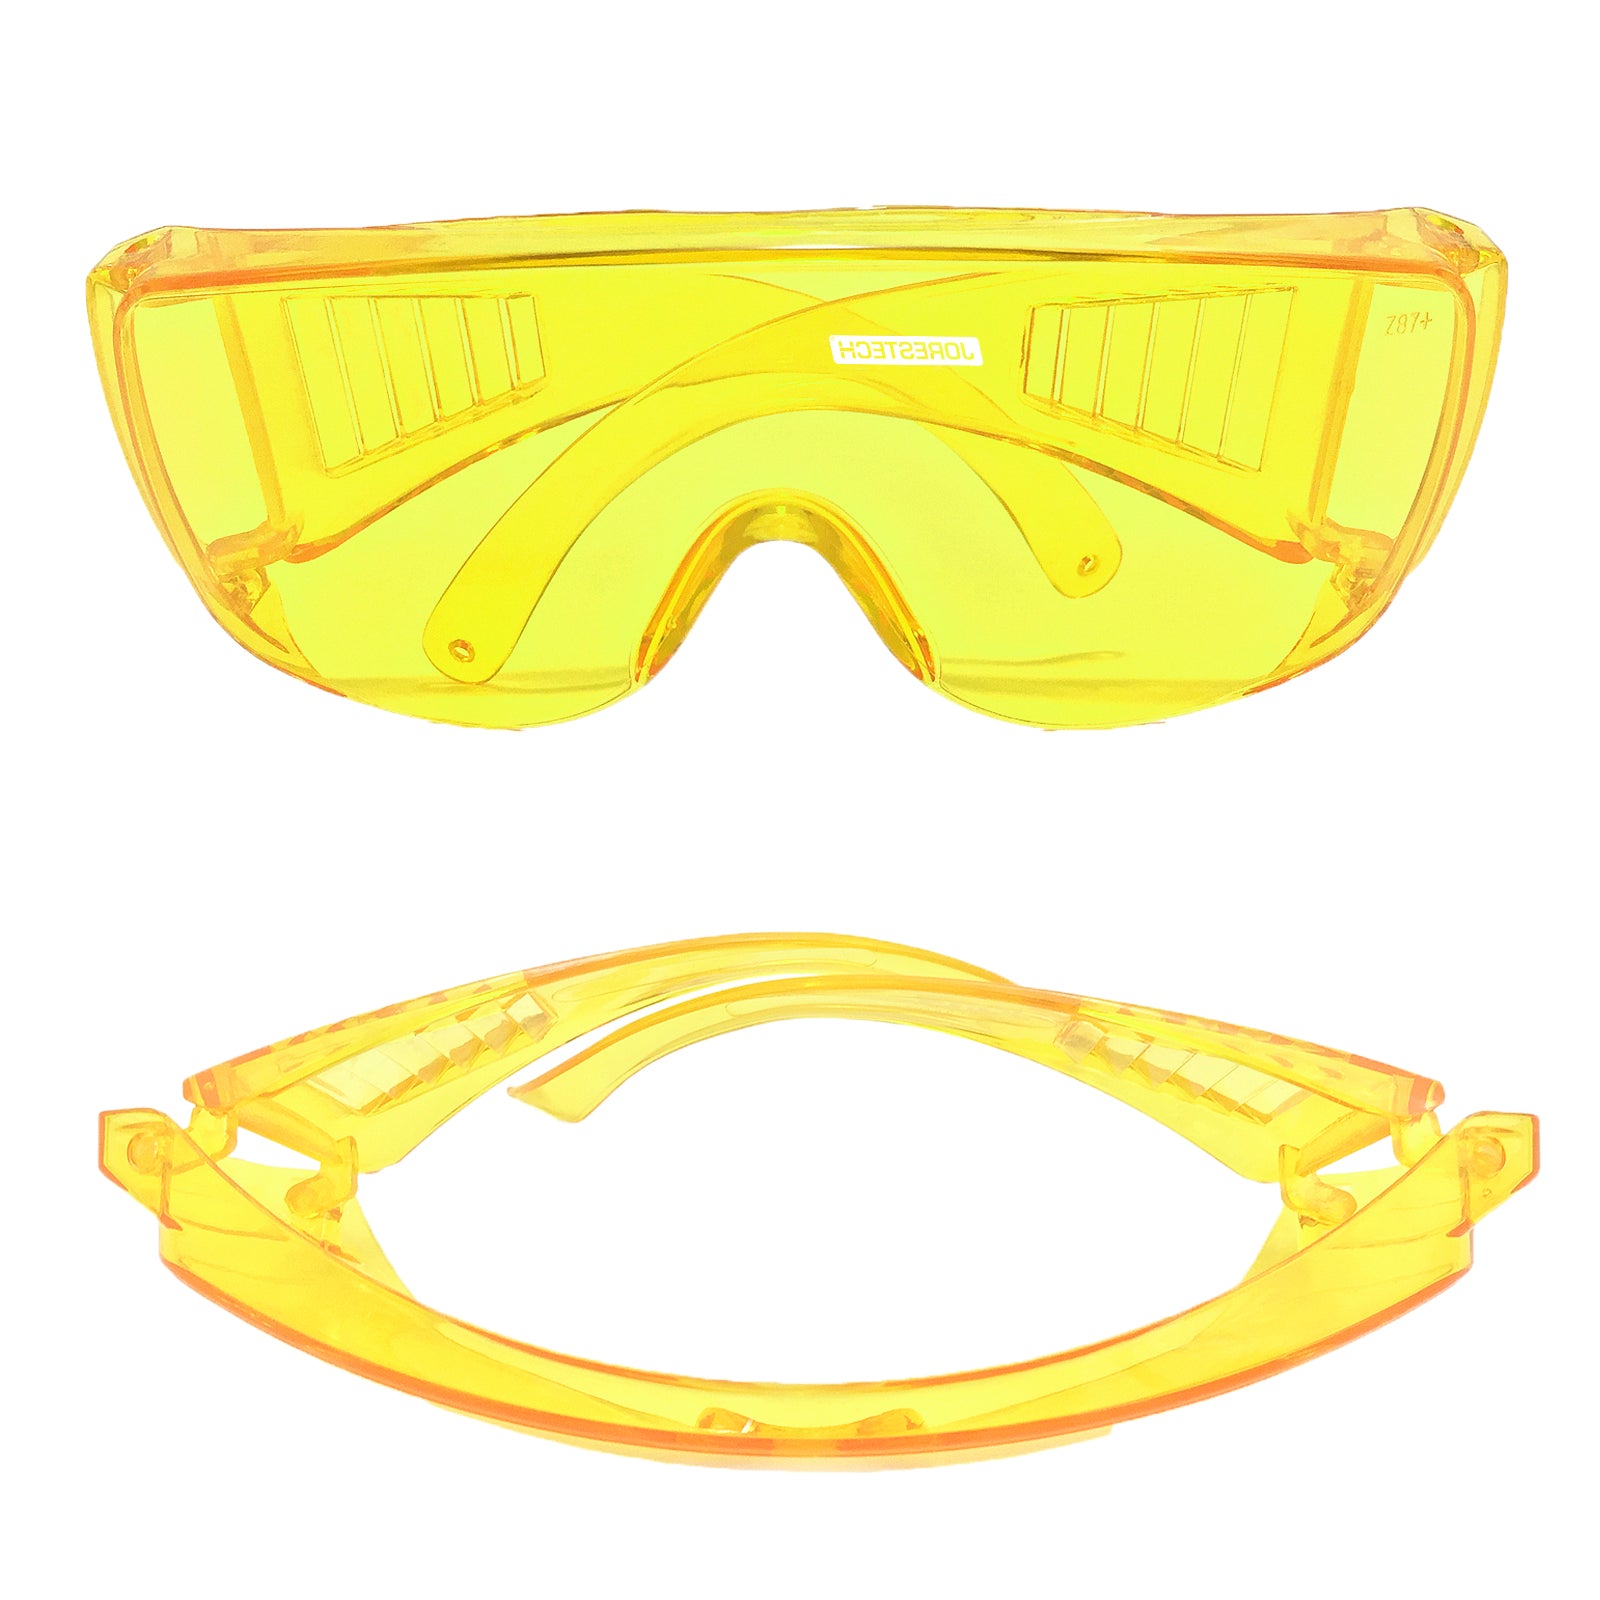 Features a front and top view of the yellow Jorestech safety overglasses for high impact protection with wide temples folded